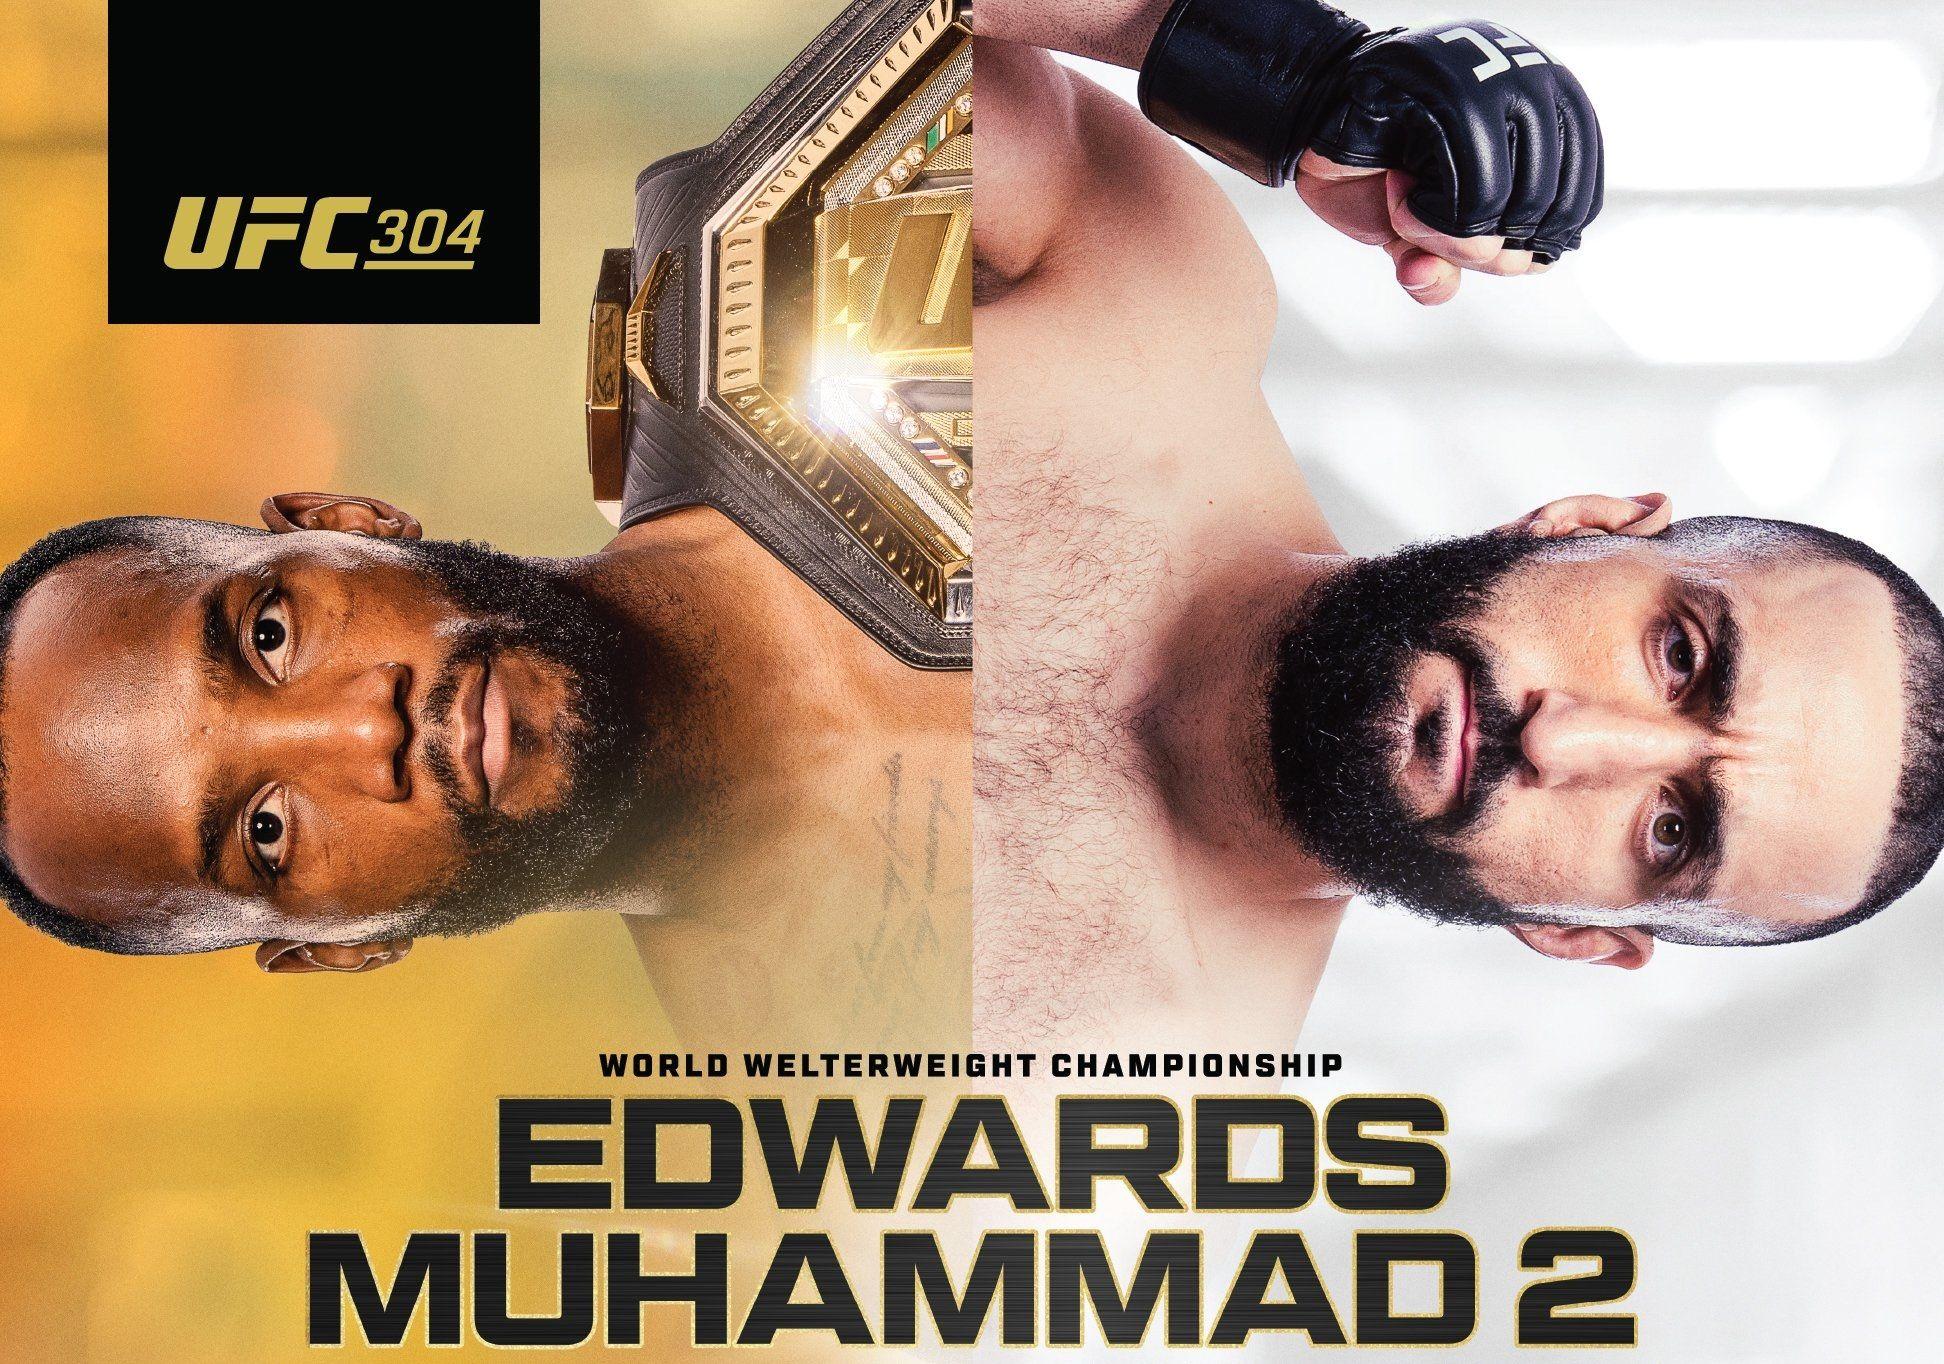 [Official Discussion Thread] - UFC 304: Edwards vs. Muhammad 2